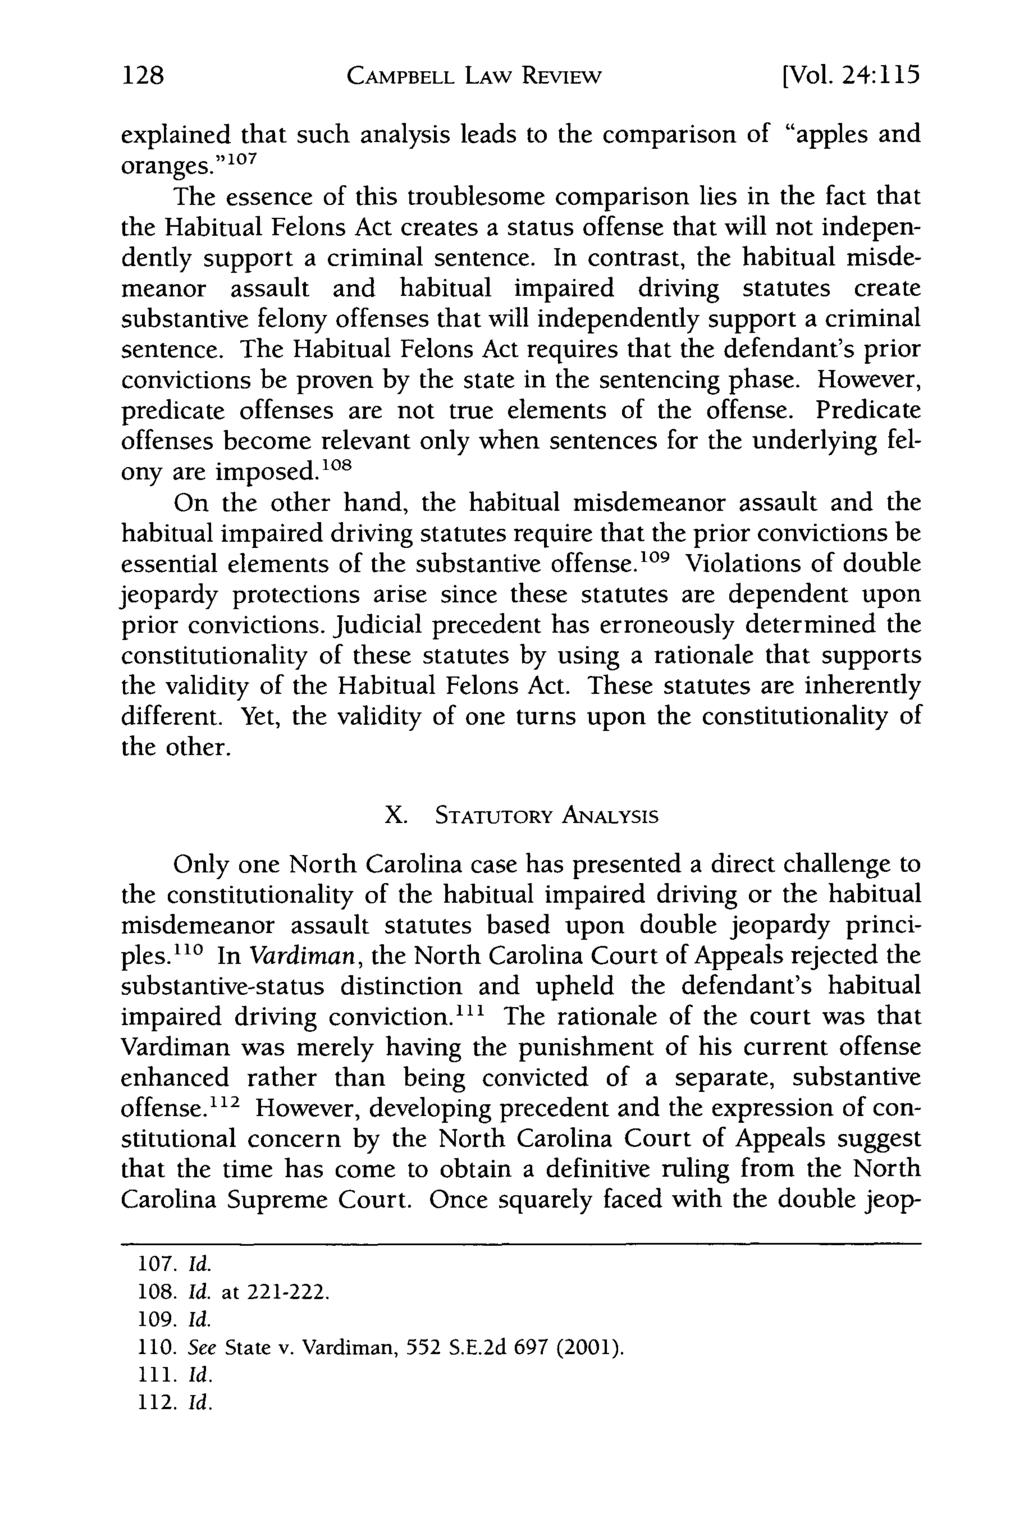 128 Campbell Law Review, Vol. 24, Iss. 1 [2001], Art. 6 CAMPBELL LAW REVIEW [Vol. 24:115 explained that such analysis leads to the comparison of "apples and oranges.